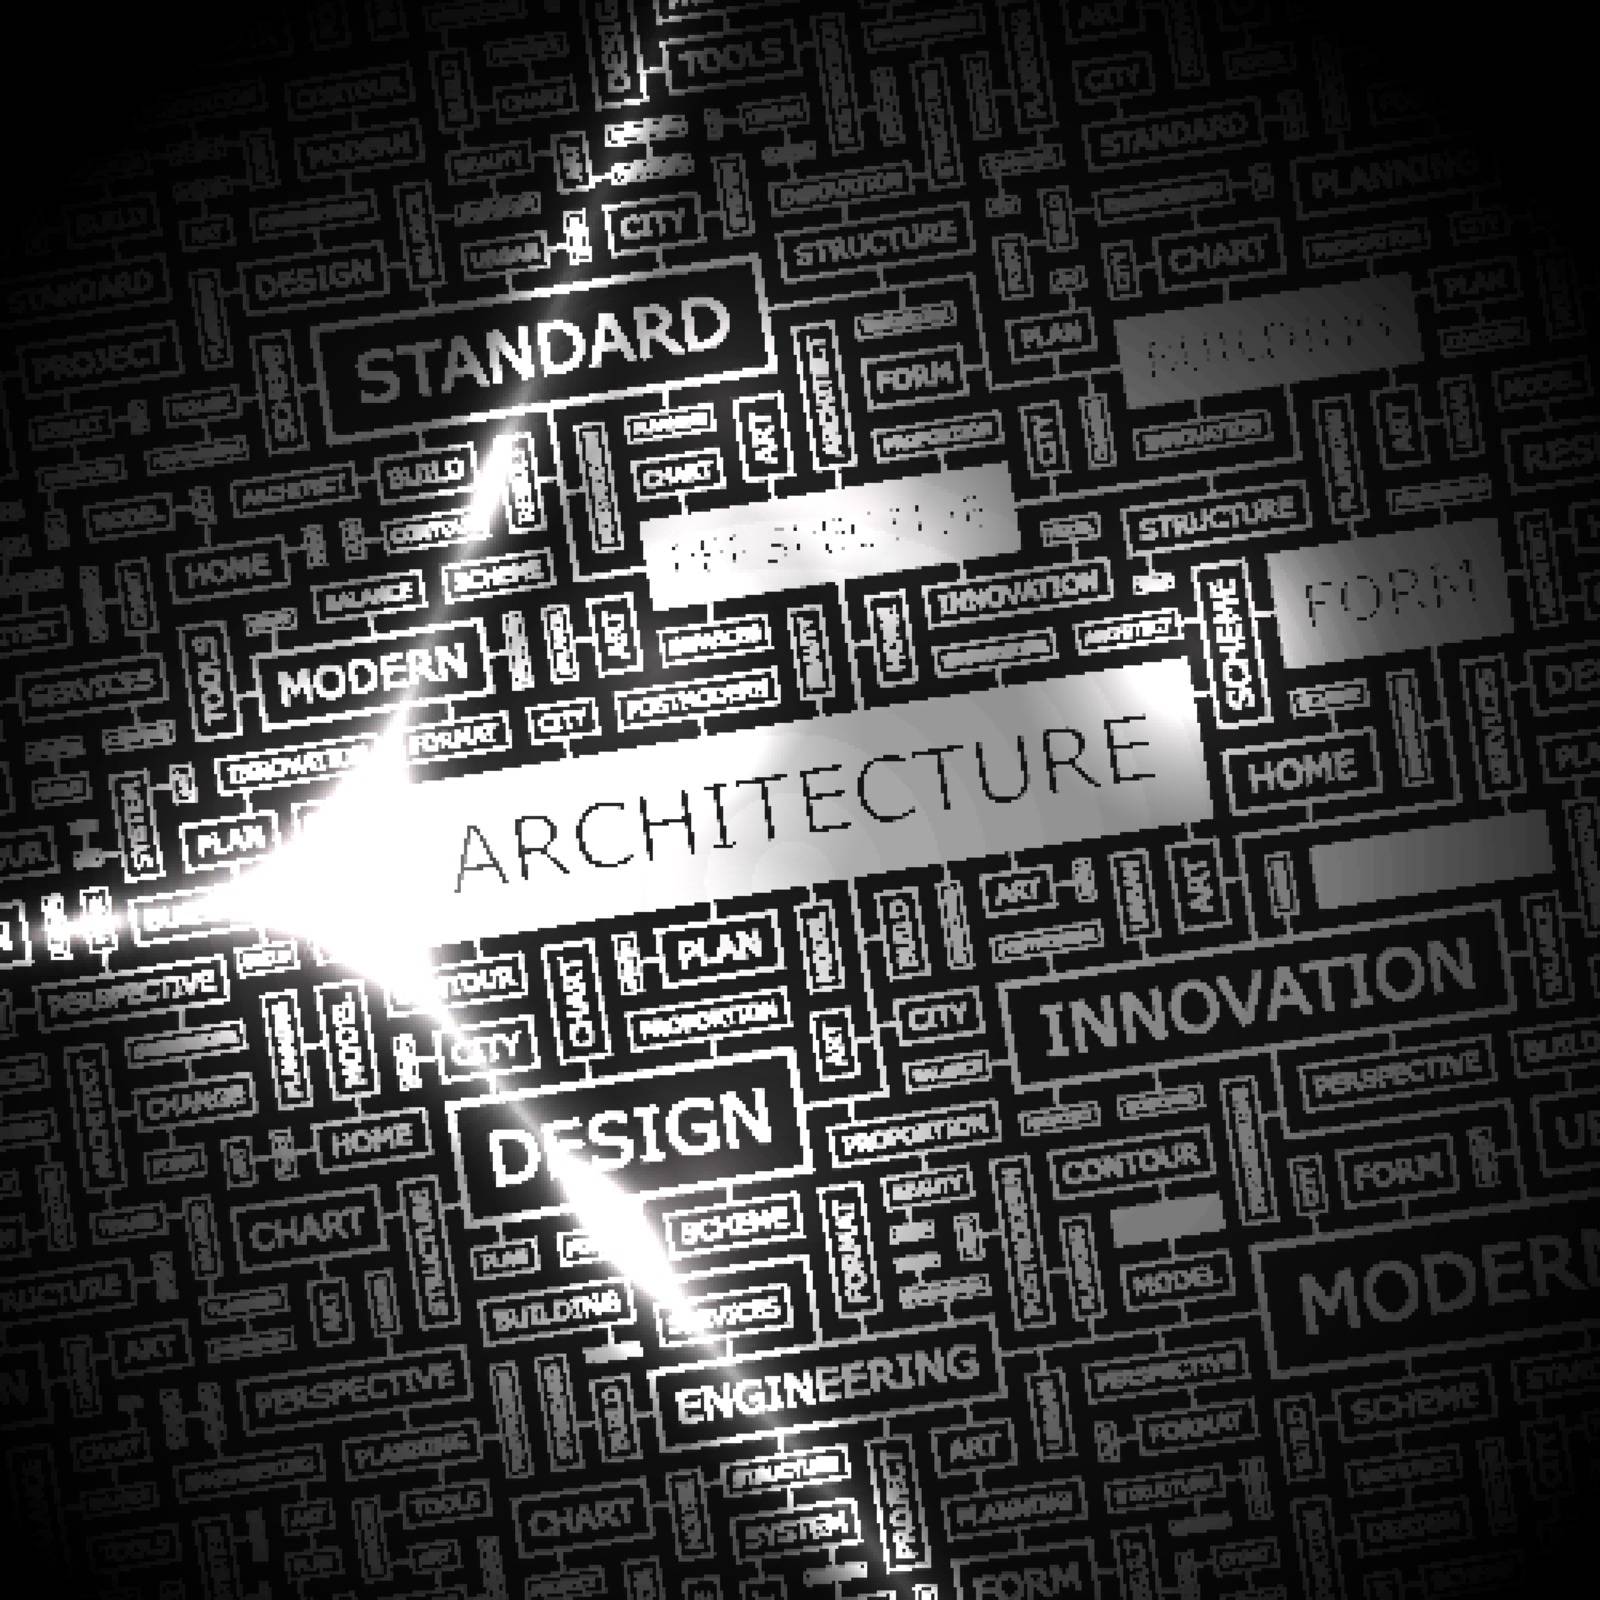 ARCHITECTURE by login